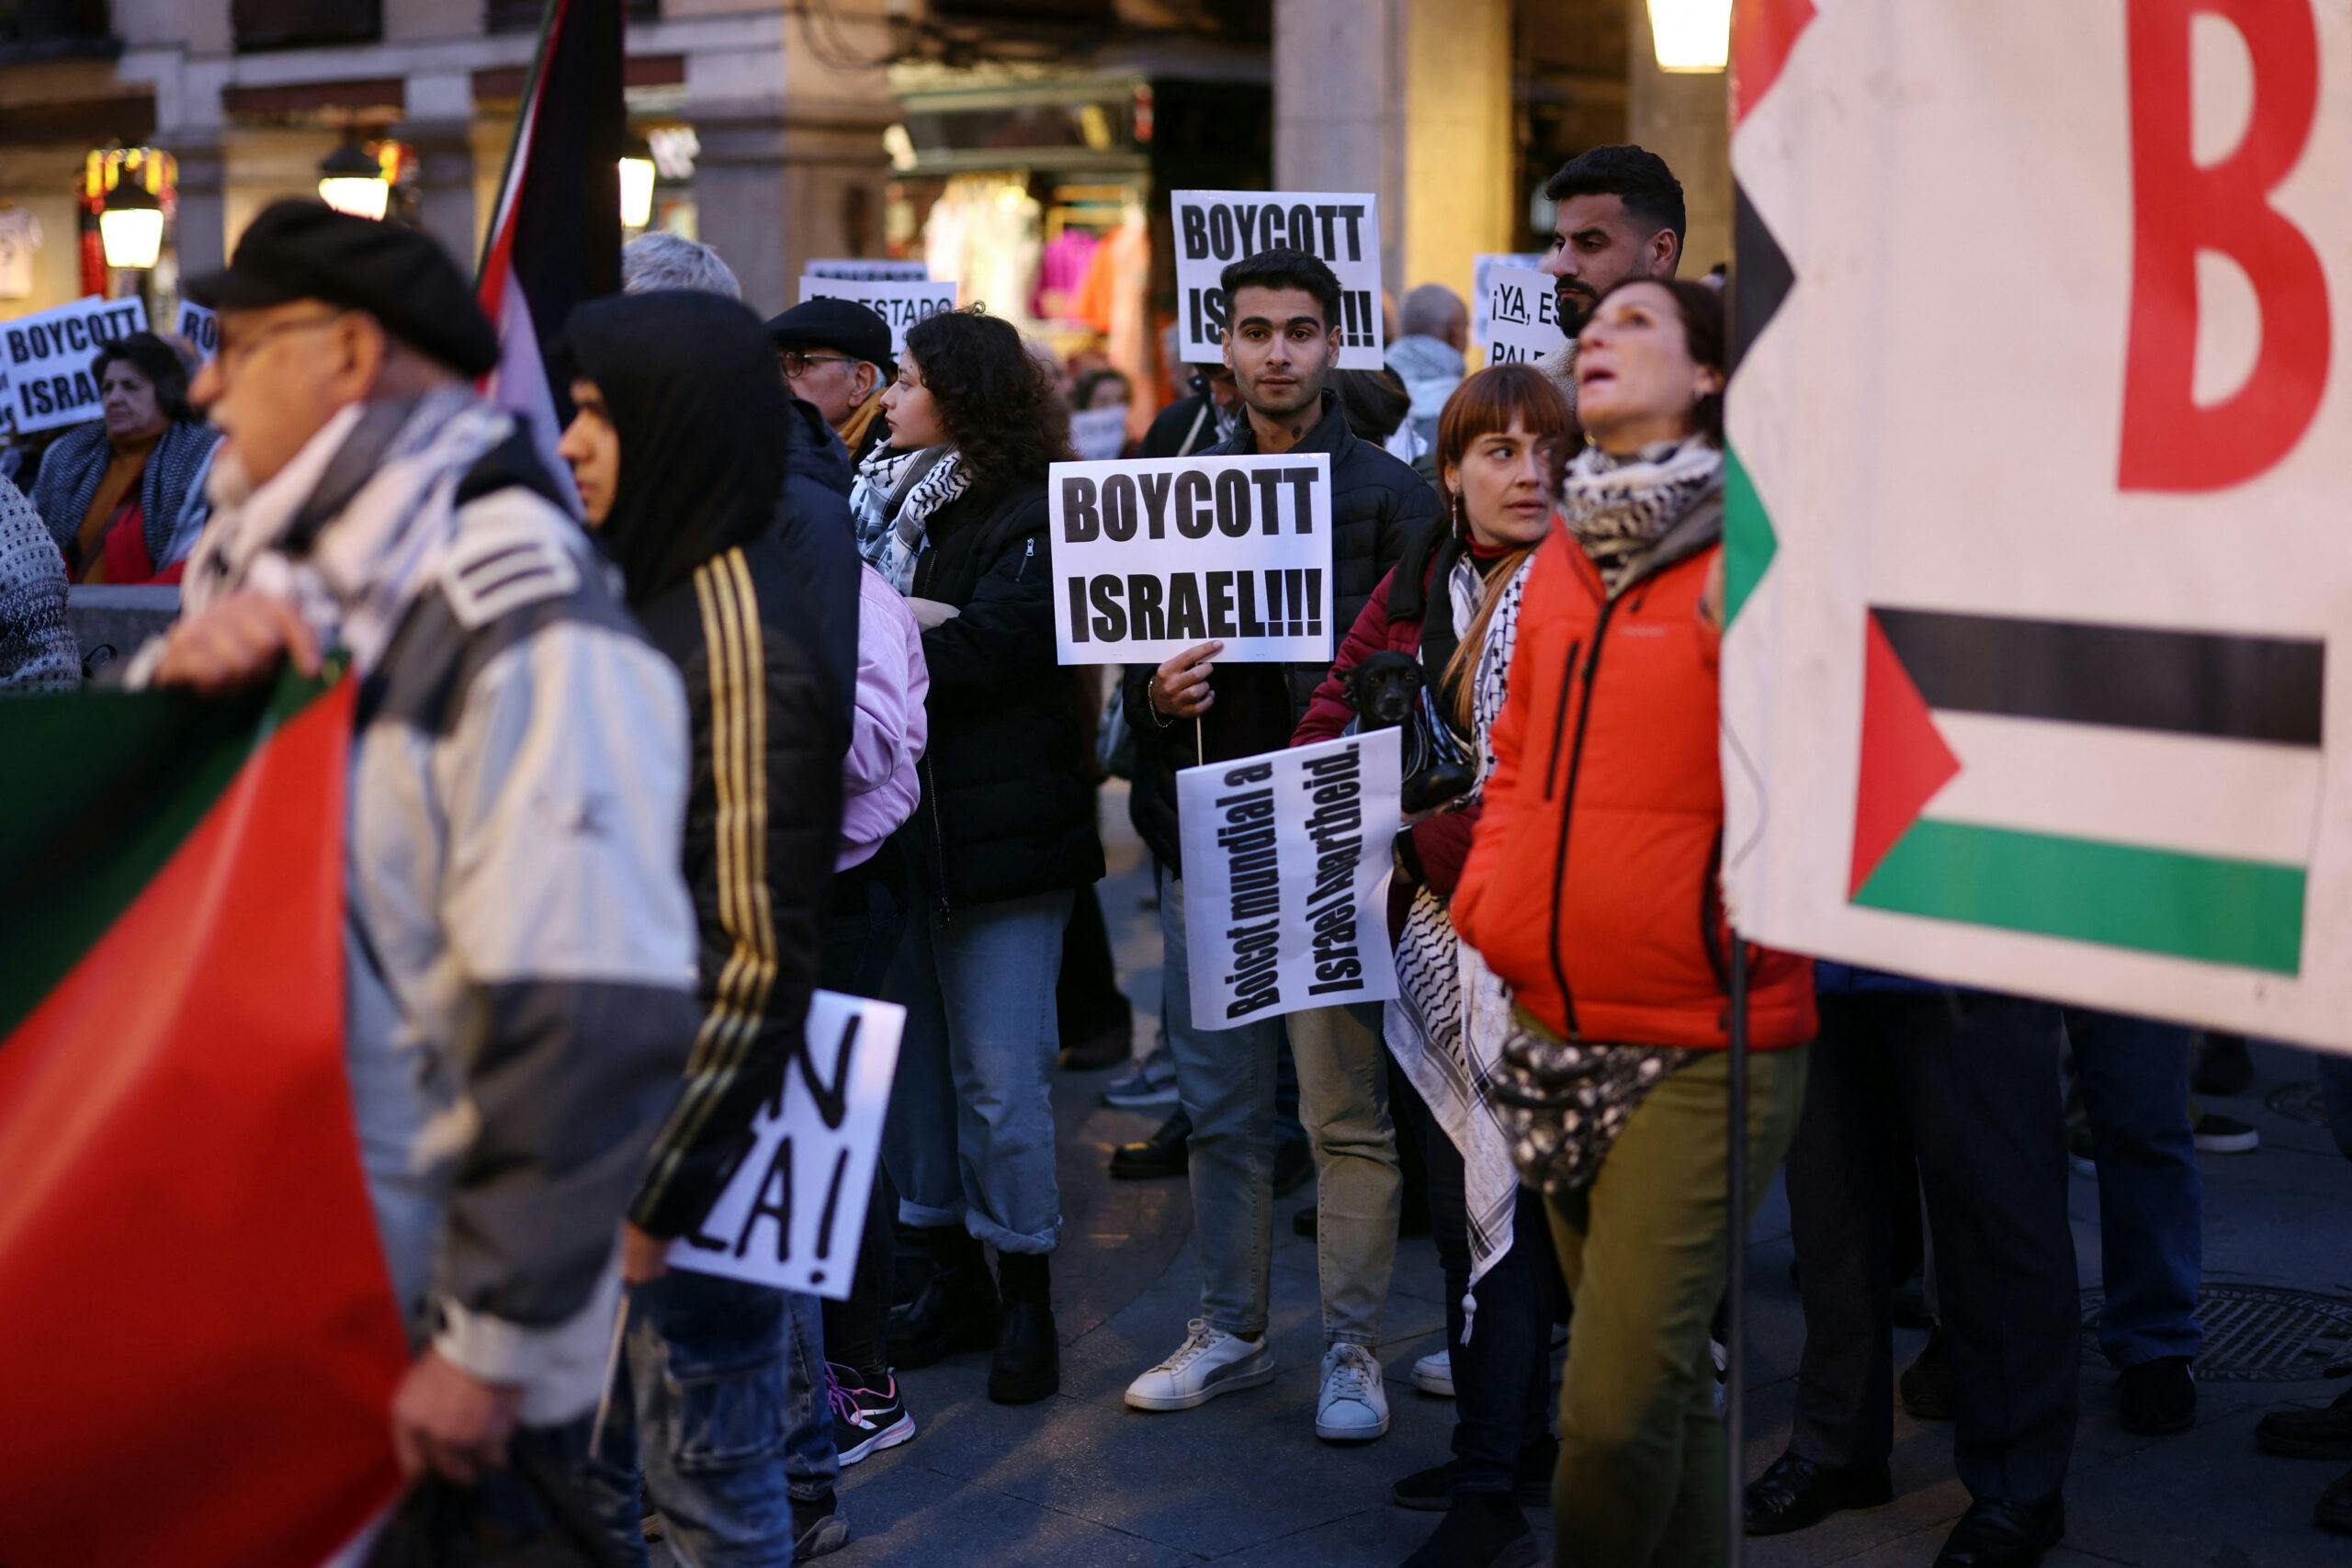 A man holds a boycott israel poster in a pro-Palestinian rally